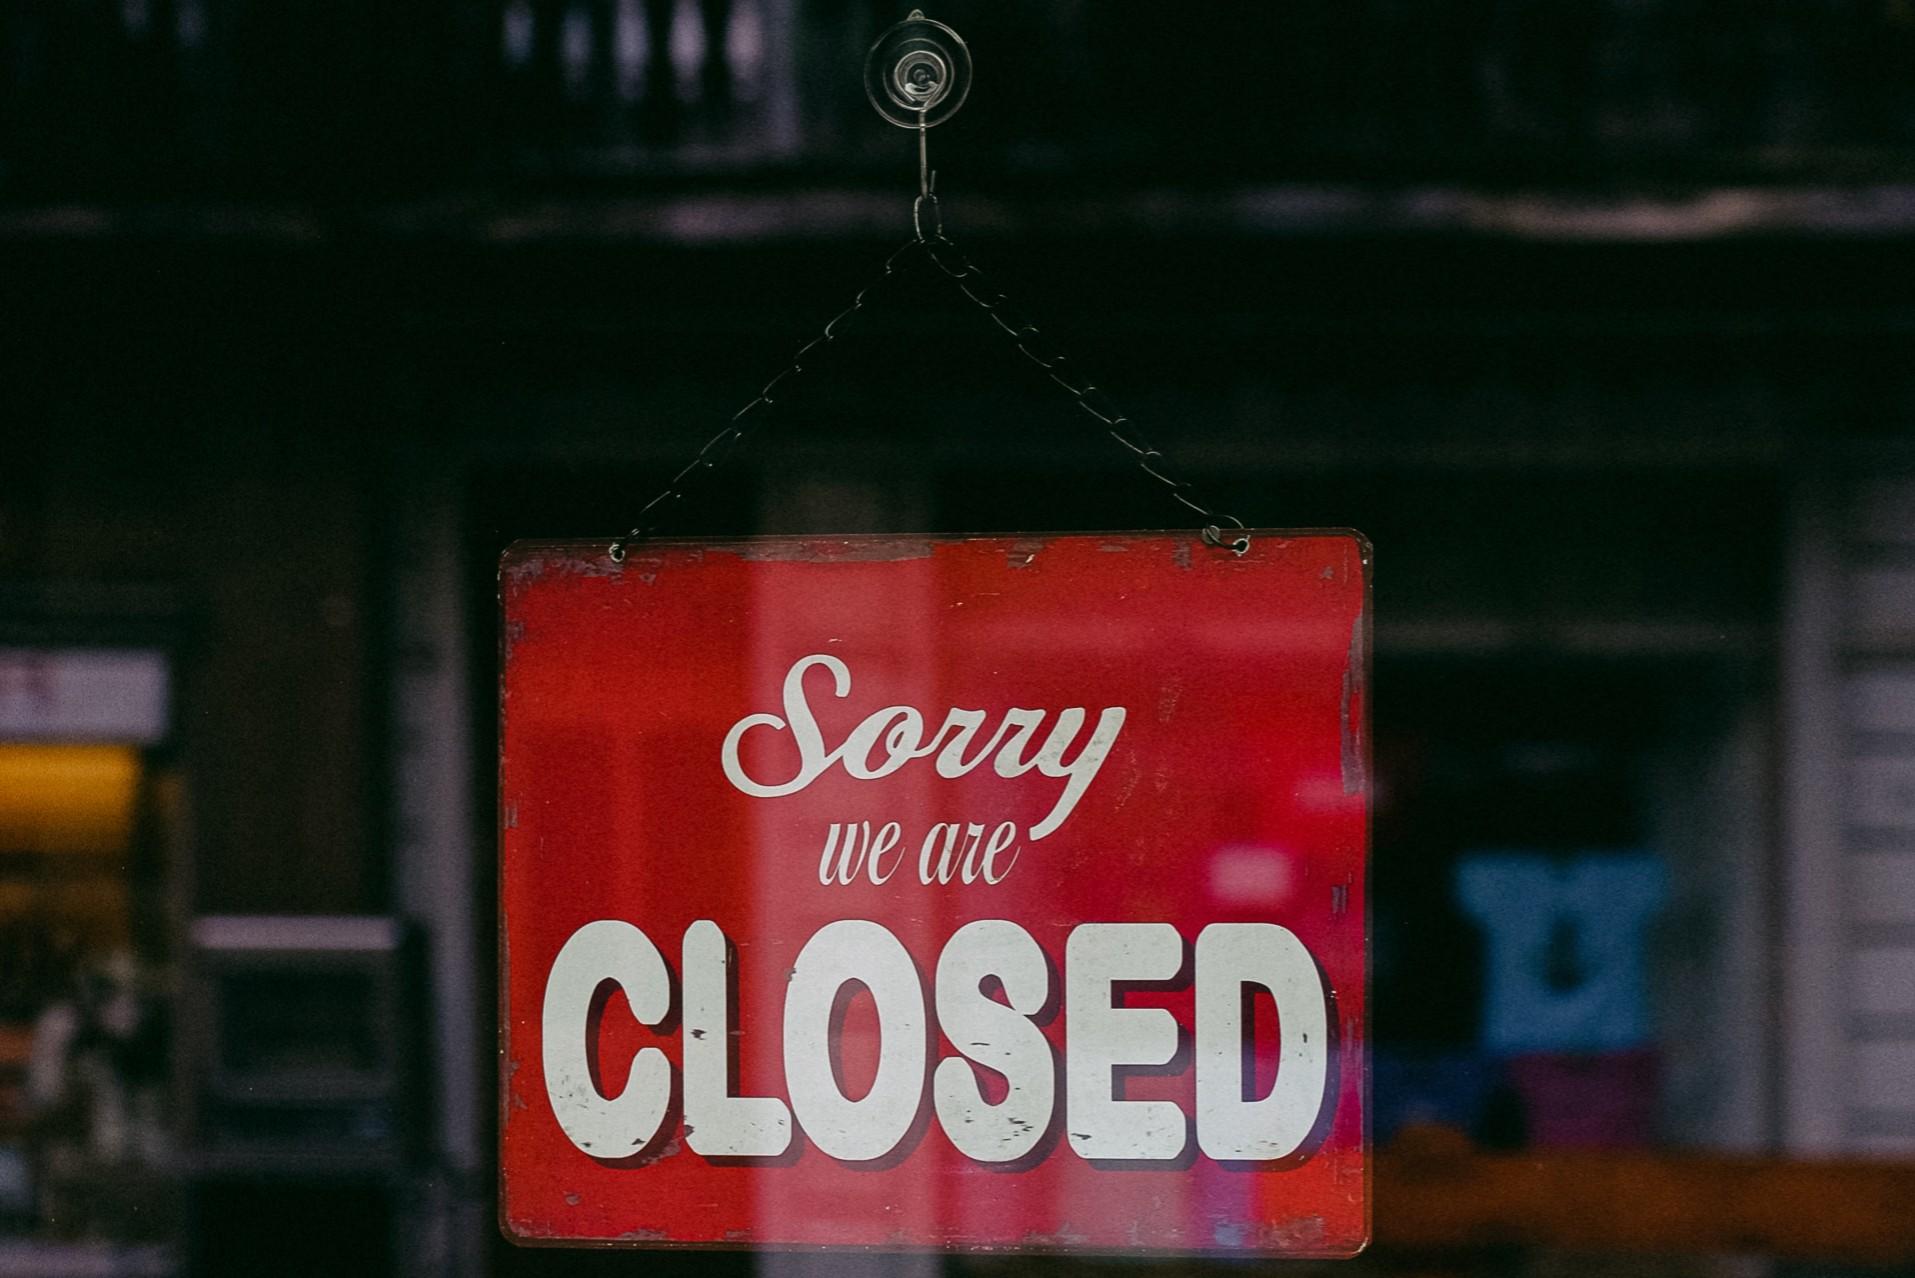 COVID-19 could see two-fifths of UK SMEs close permanently, survey finds